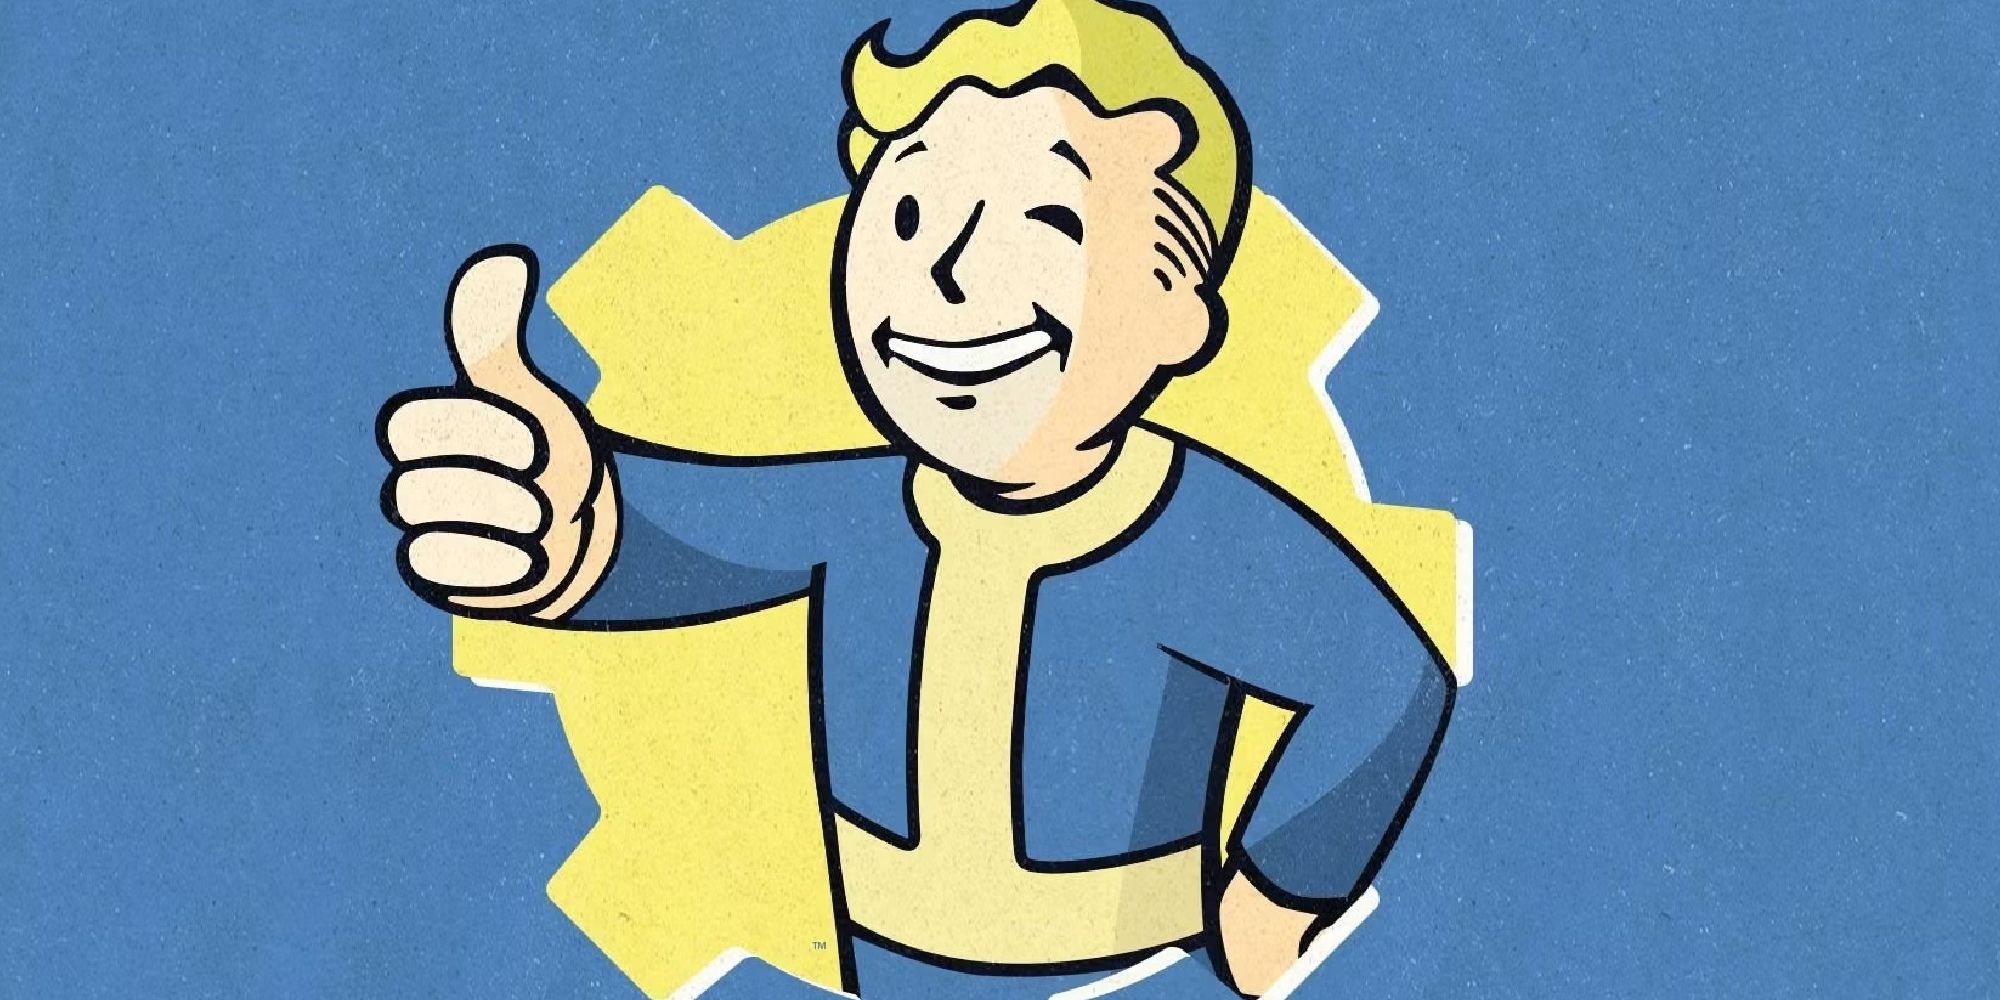 vault boy from fallout with his thumb up over a blue background and yellow vault